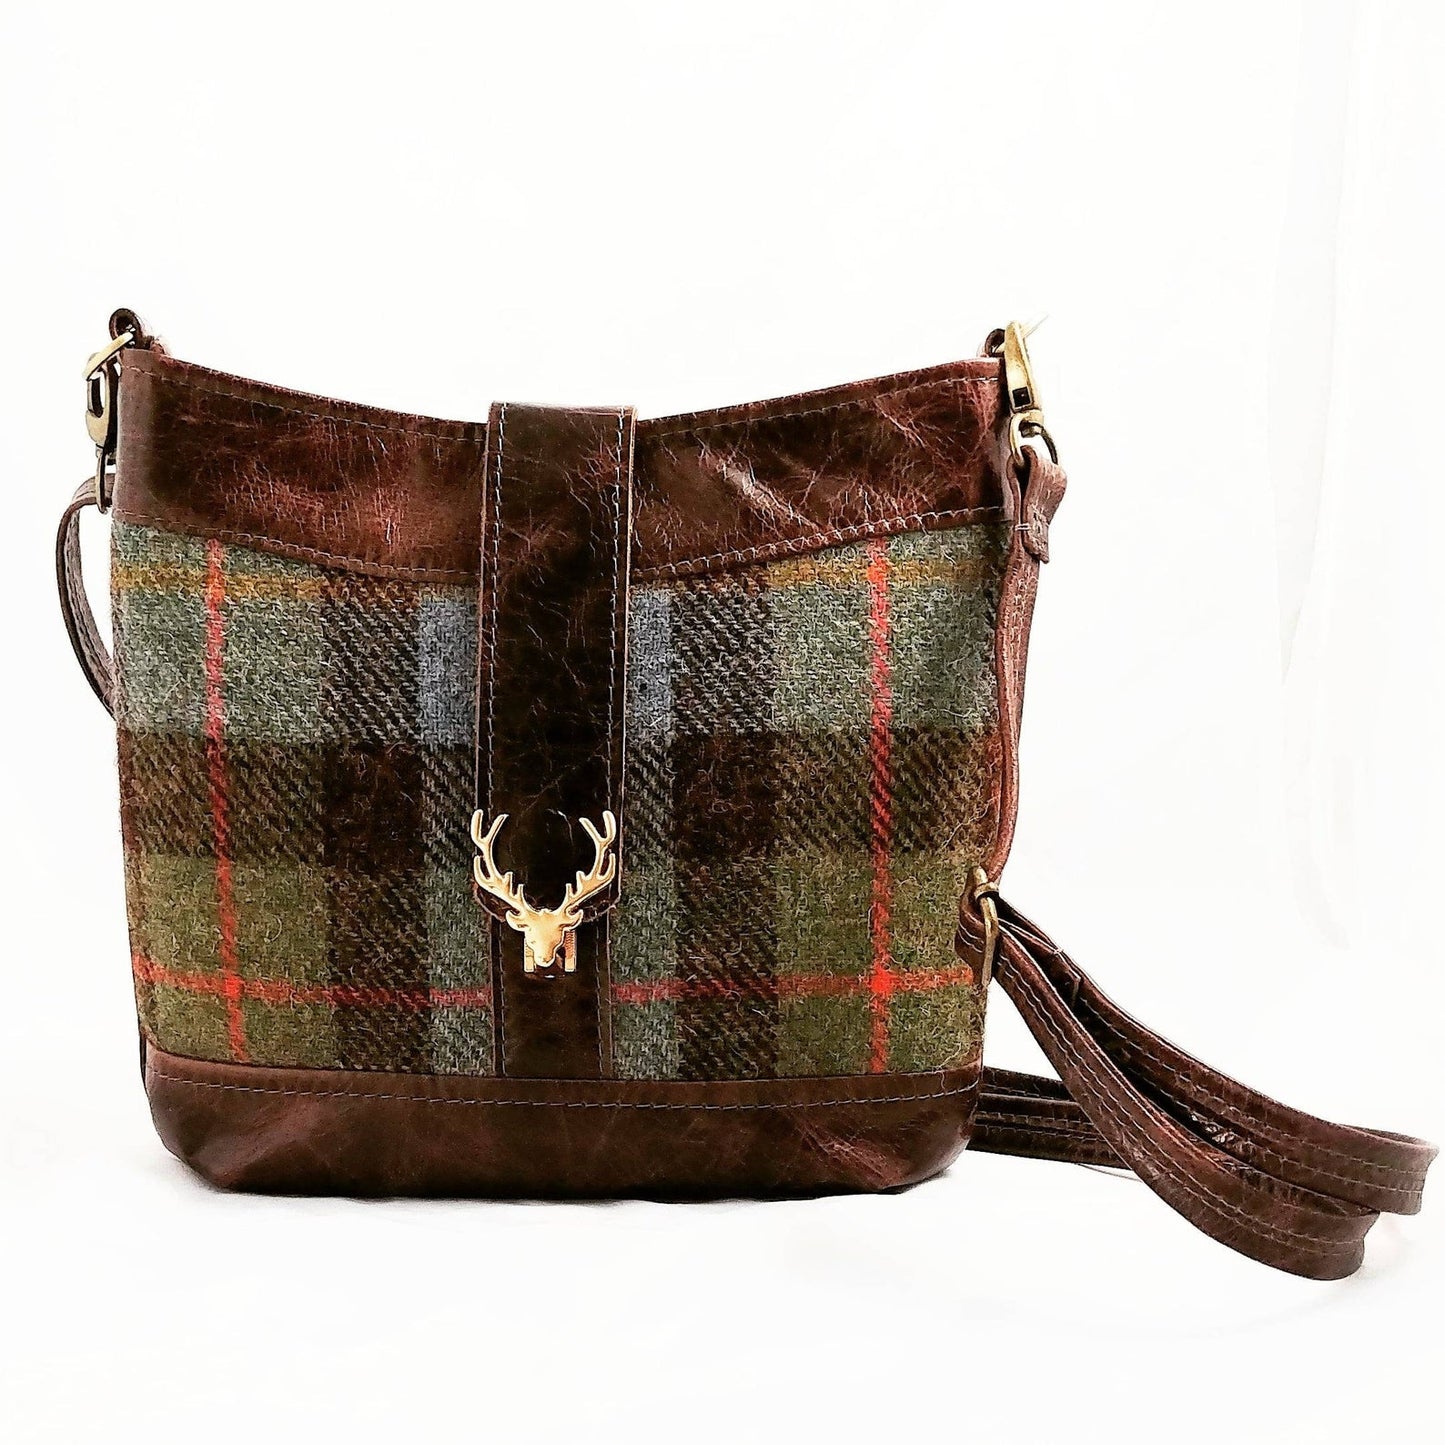 Highland Swish in Leather with Black Watch Harris Tweed